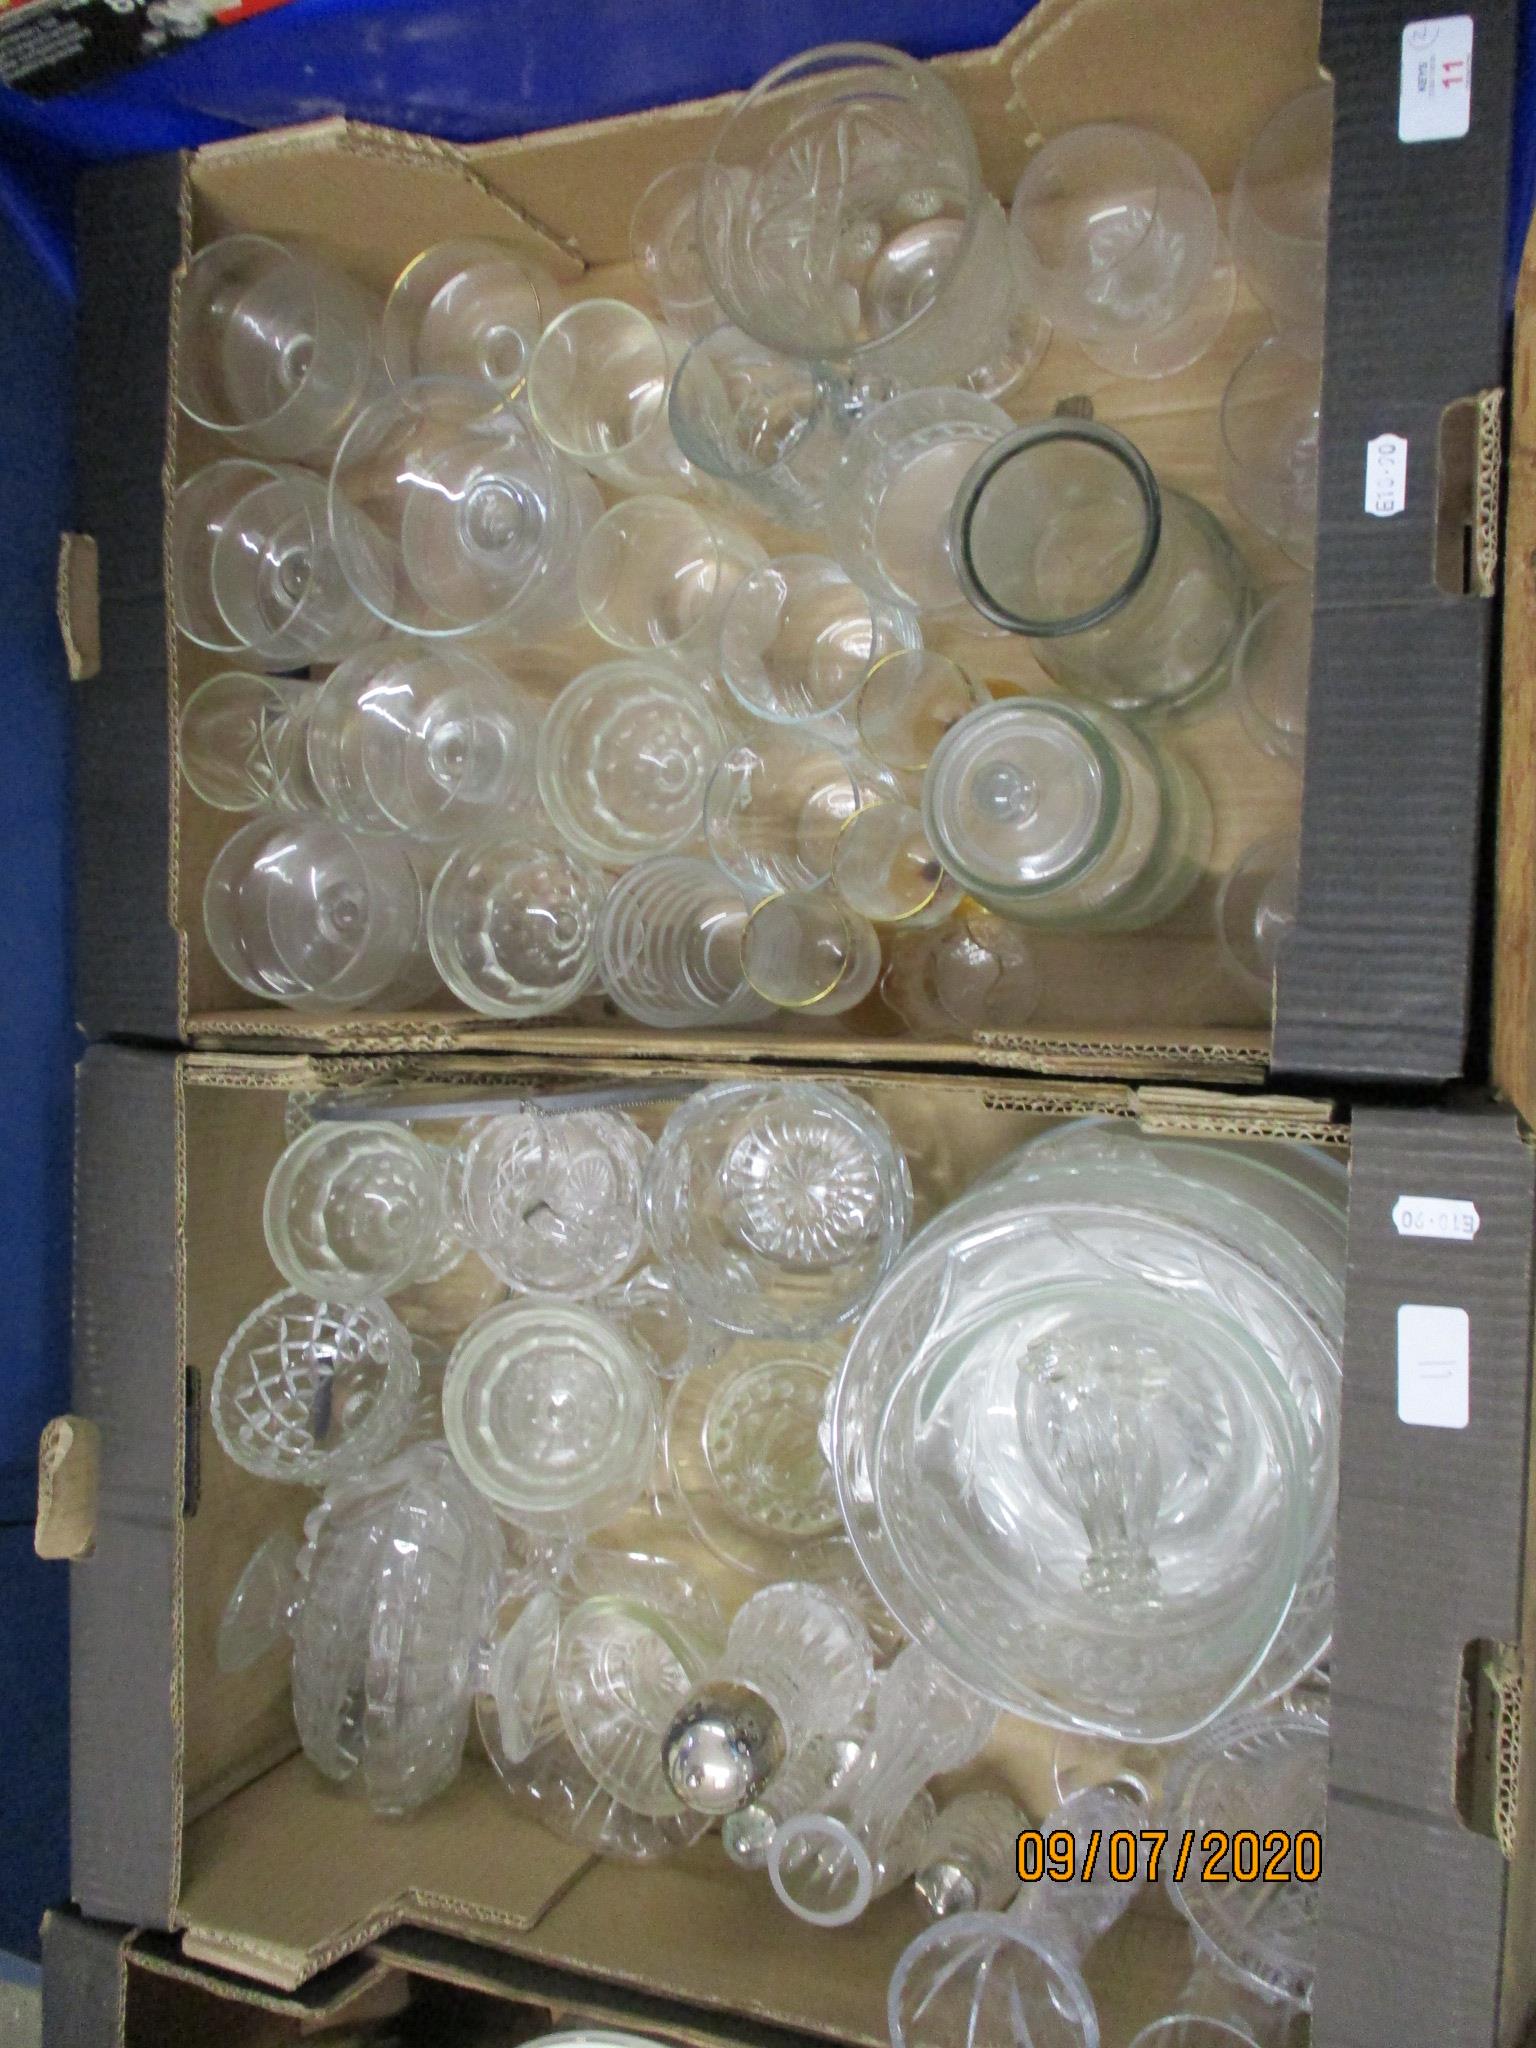 TWO BOXES VARIOUS GLASSWARE INCLUDING DRINKING GLASSES, TUREENS, SIFTER ETC